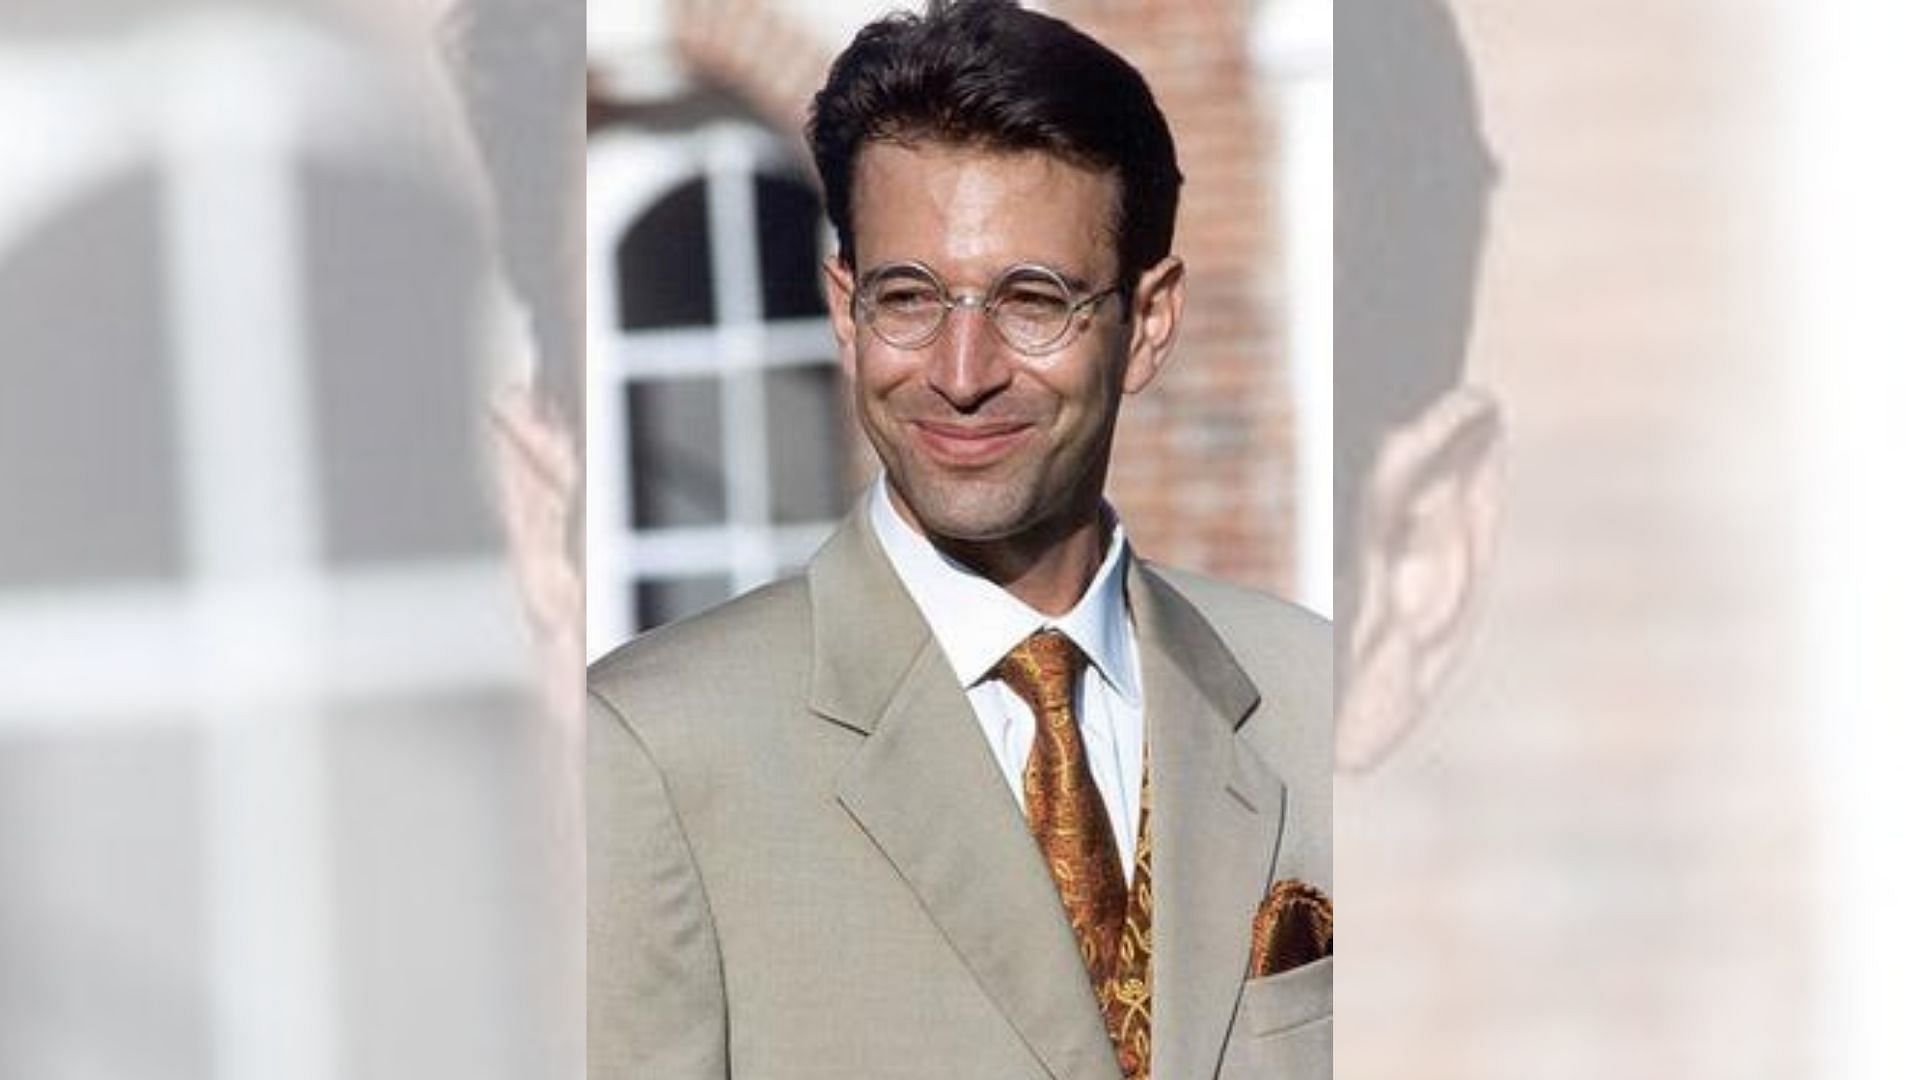 Daniel Pearl, the South Asia Bureau Chief of The Wall Street Journal, was kidnapped and later beheaded in Karachi in 2002.